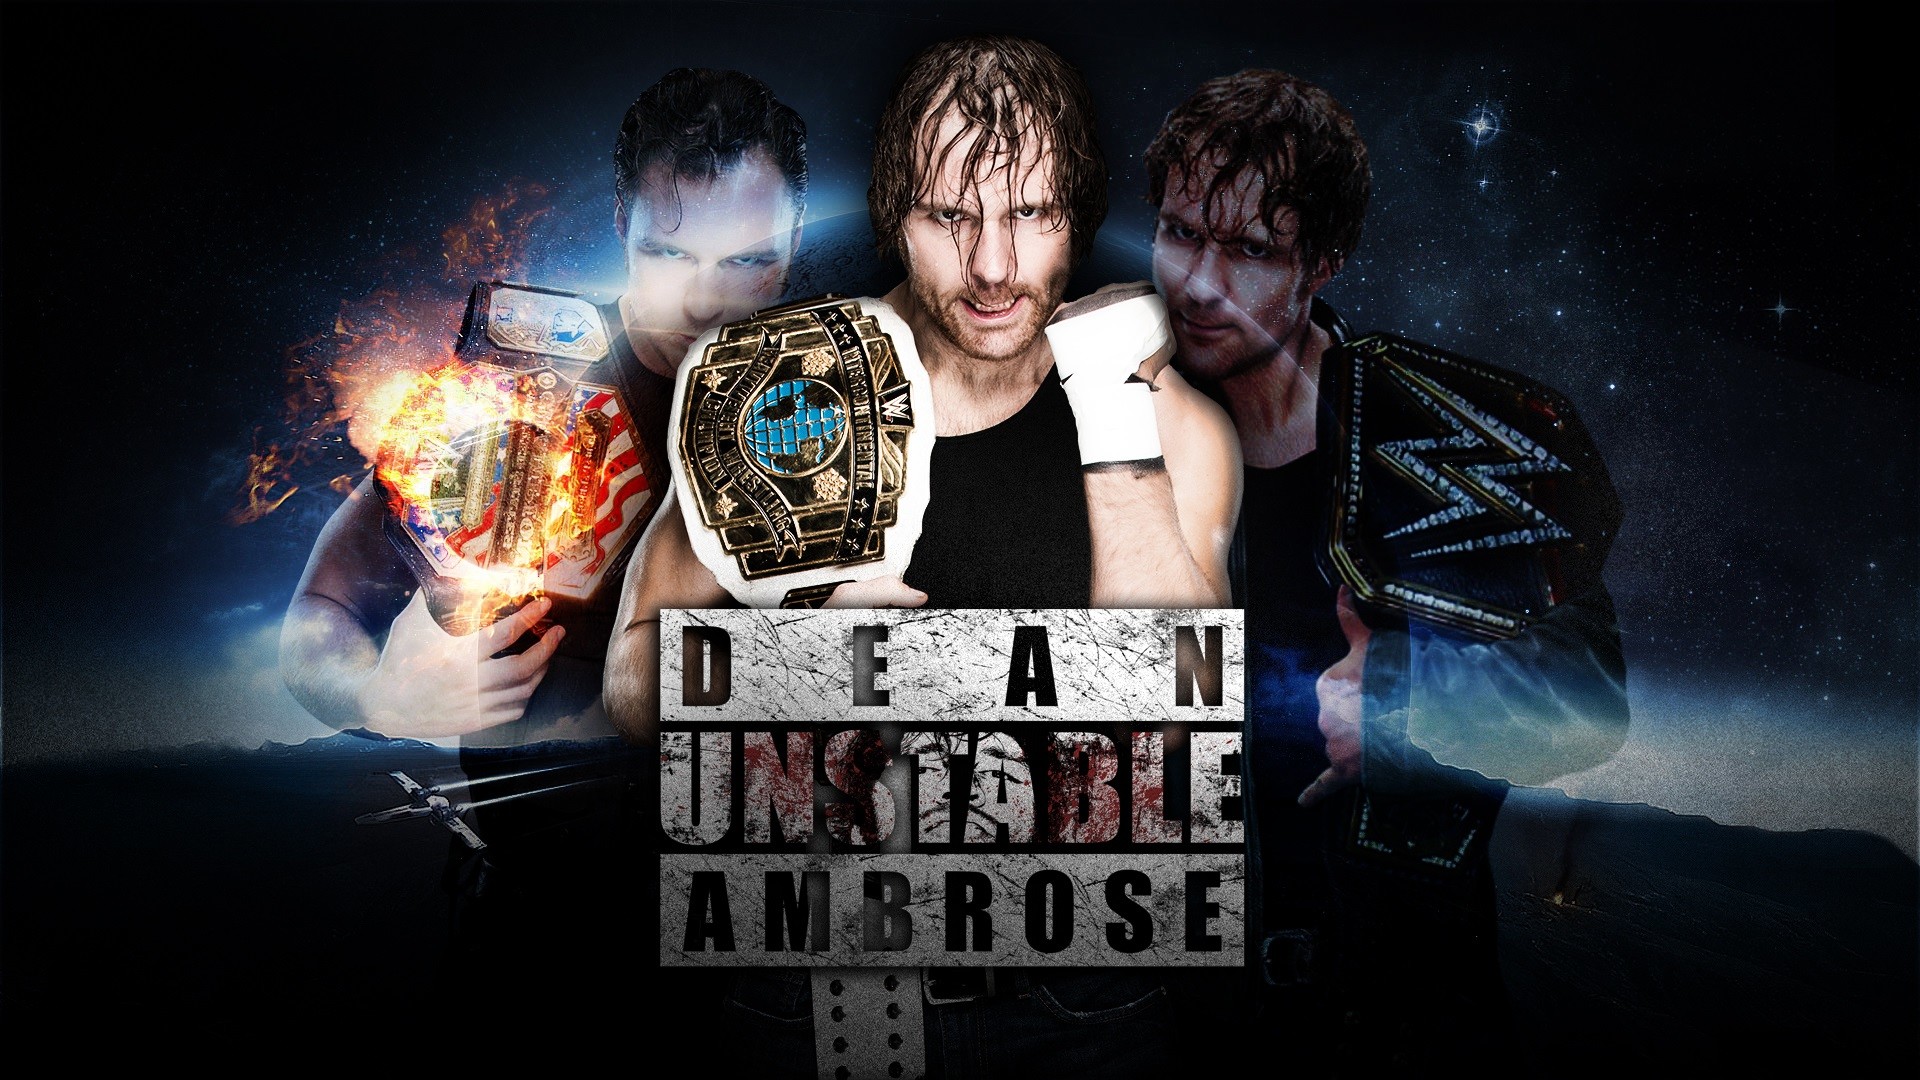 Download Dean Ambrose wallpapers to your cell phone